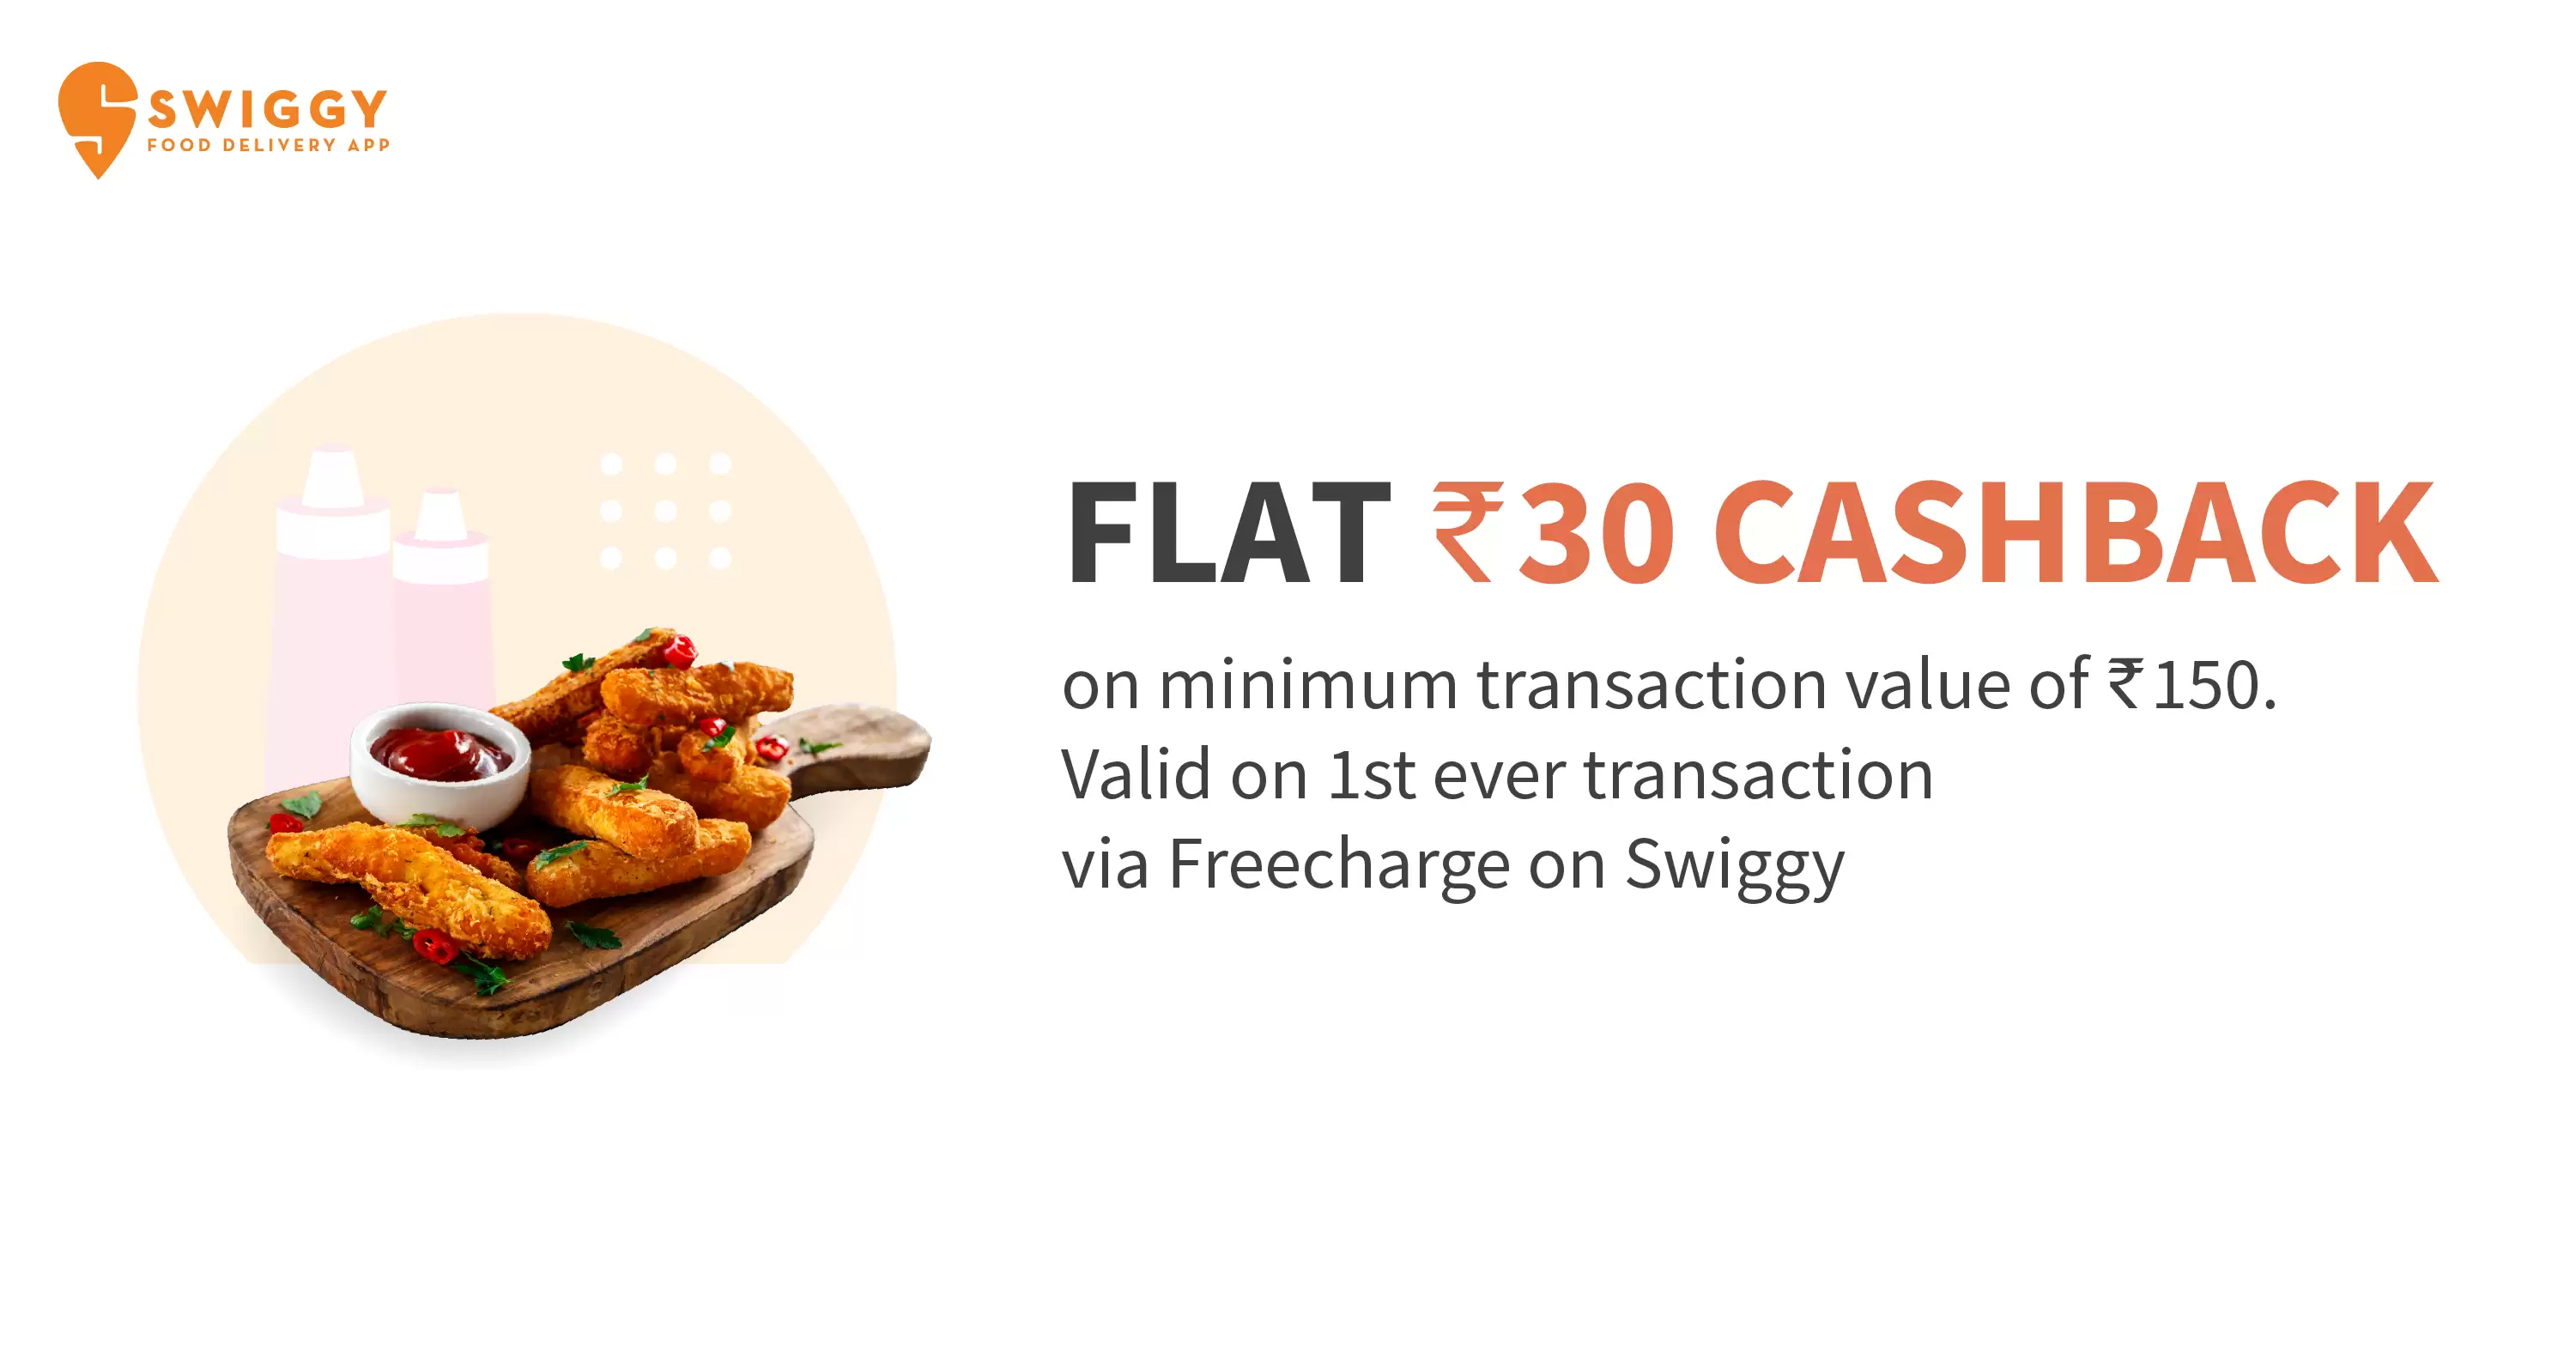 Get Flat Rs.30 Cashback On Minimum Transaction Of Rs.150 On First Ever Transaction On Swiggy Via Freecharge